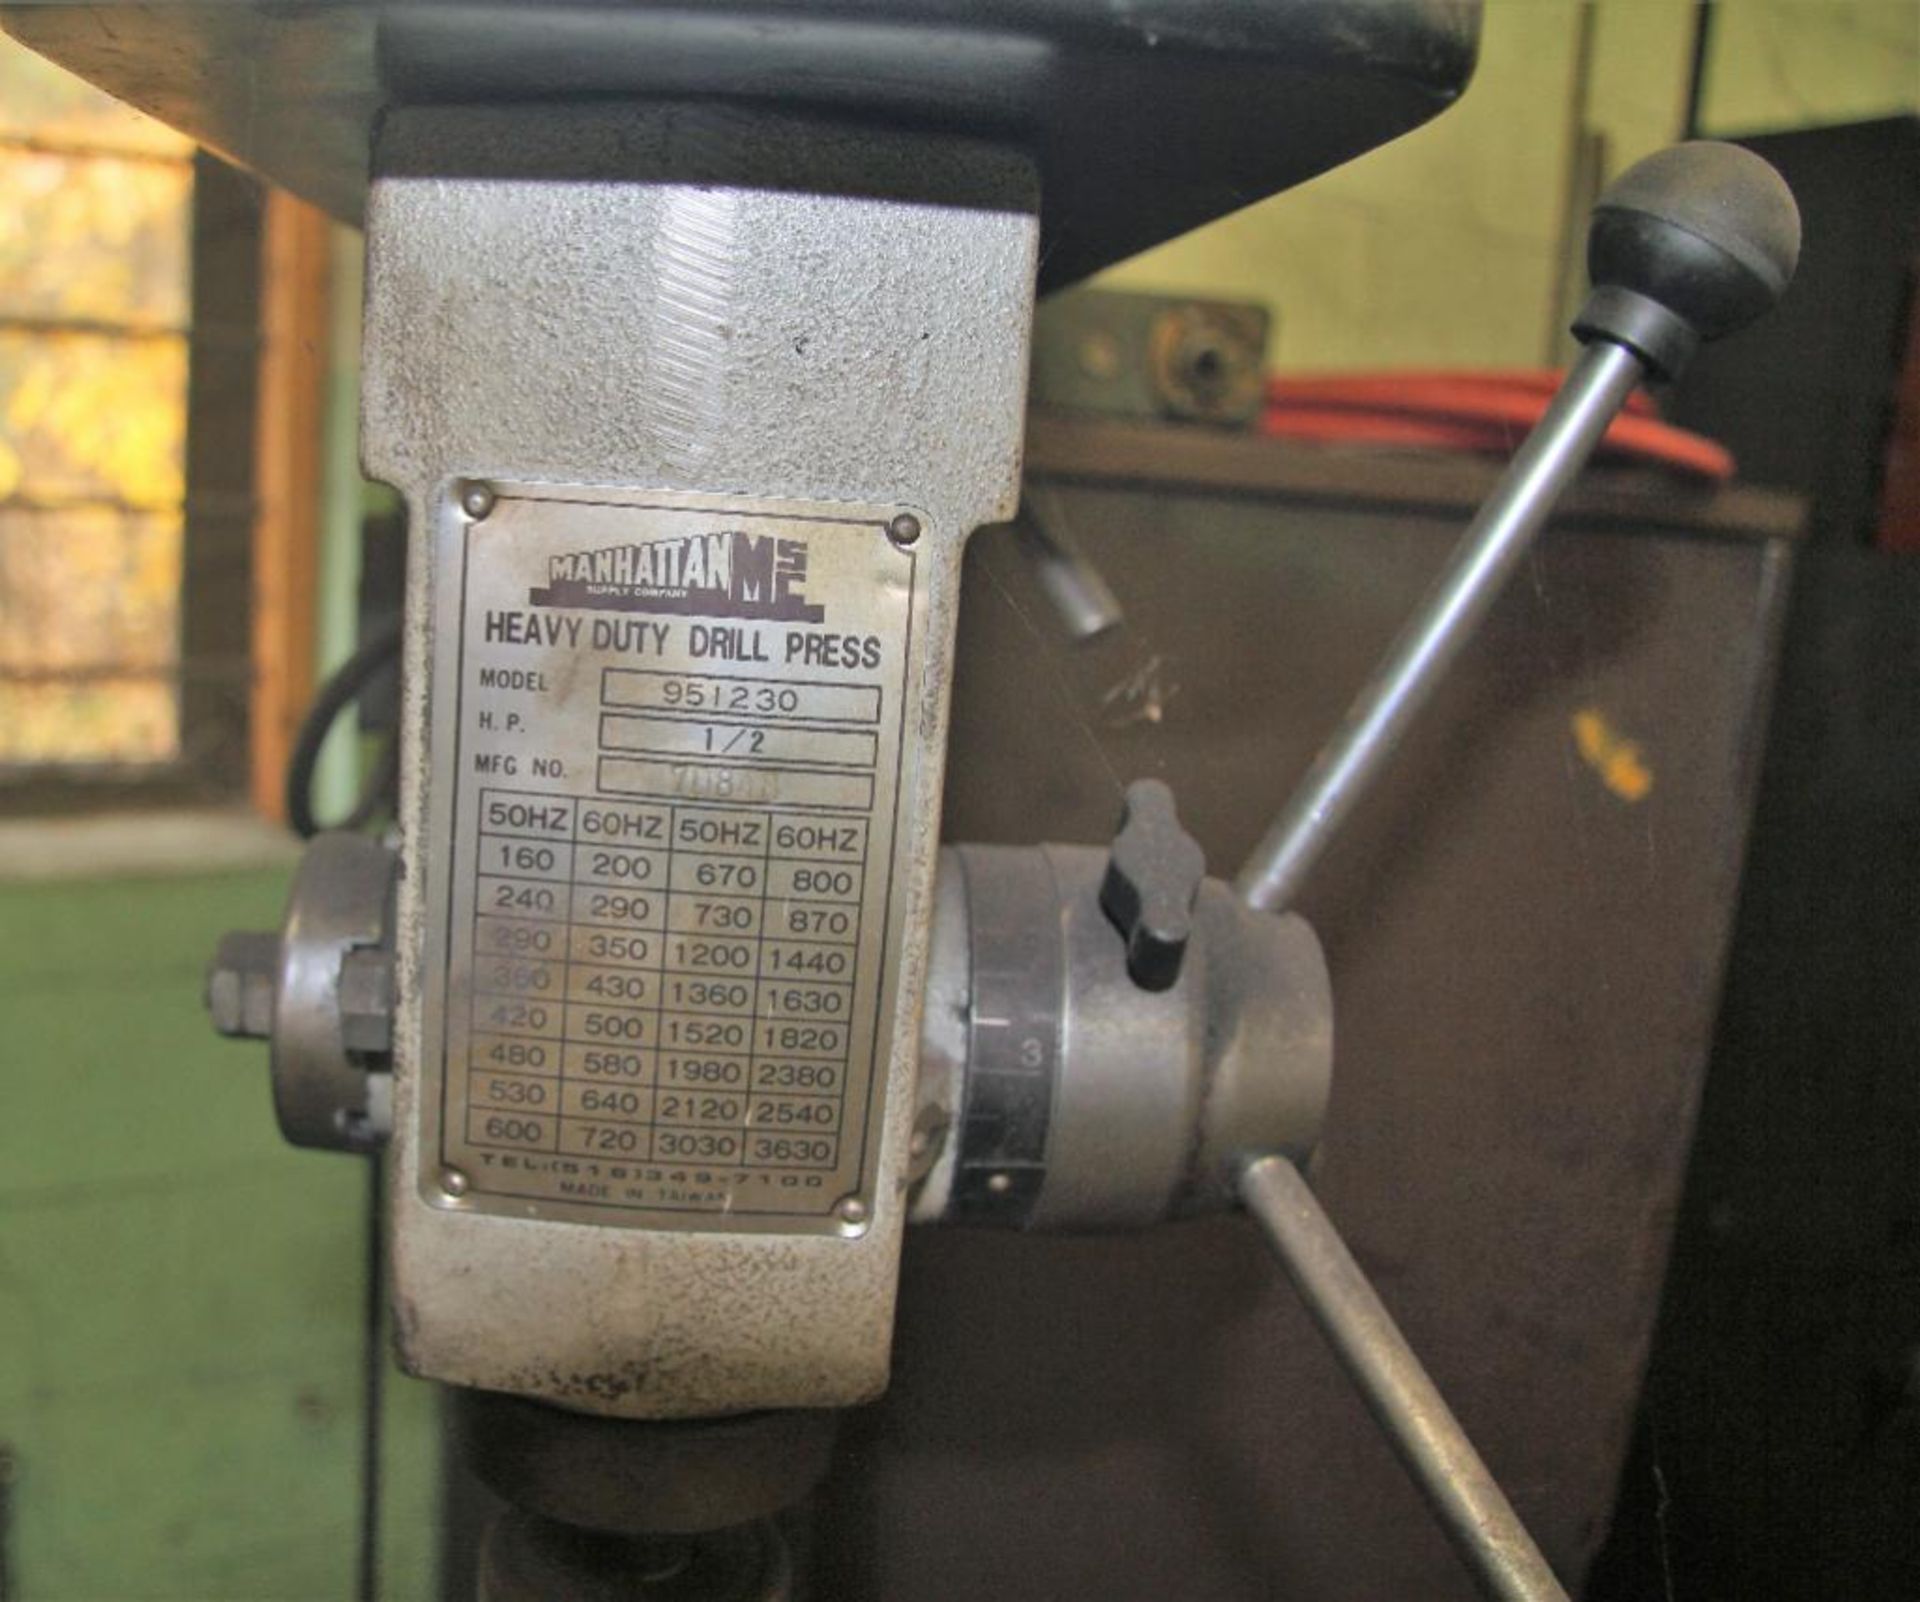 16" Manhattan Mdl.951230 Floor Type Drill Press, 1/2-HP, Single Phase, 13-3/4"Dia. Table, S/N:70848 - Image 2 of 3